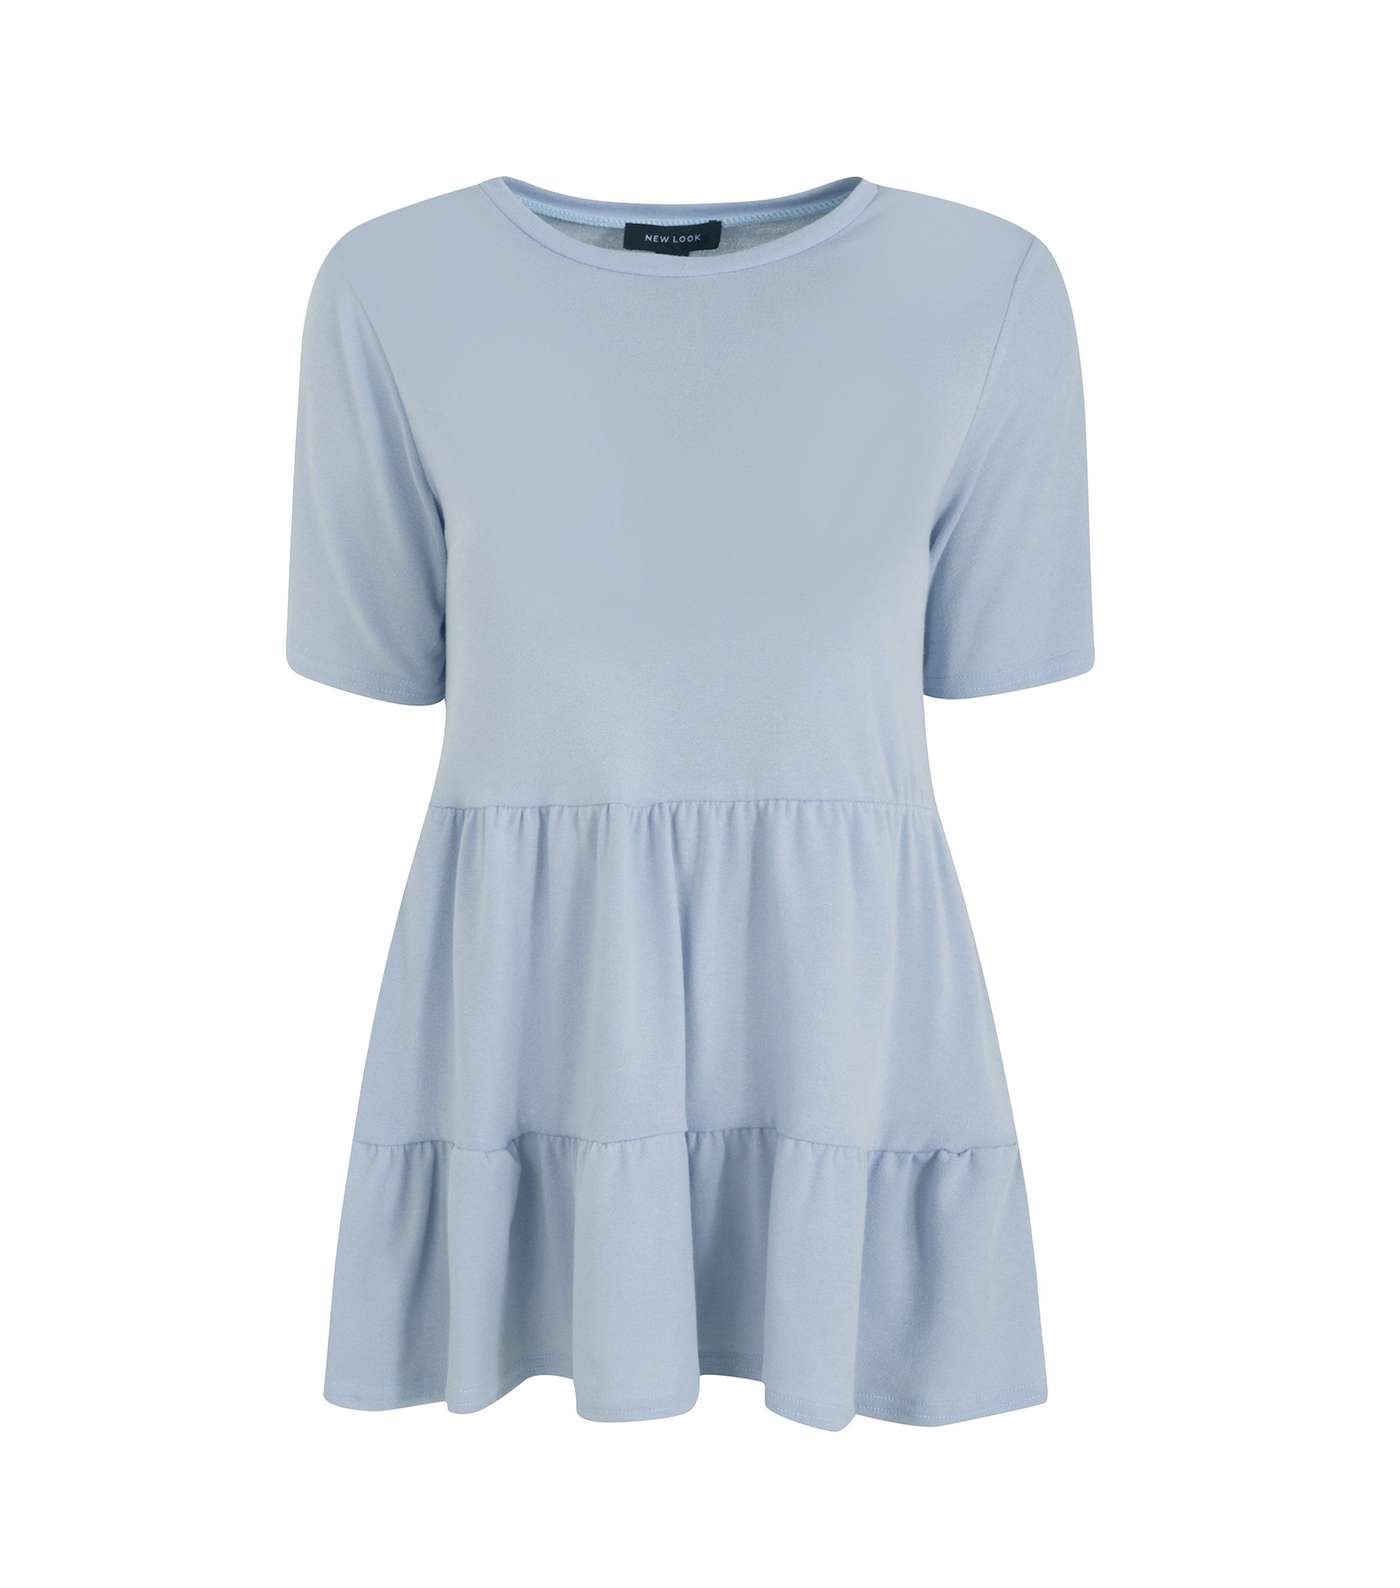 Pale Blue Tiered Peplum Jersey Top Image 5